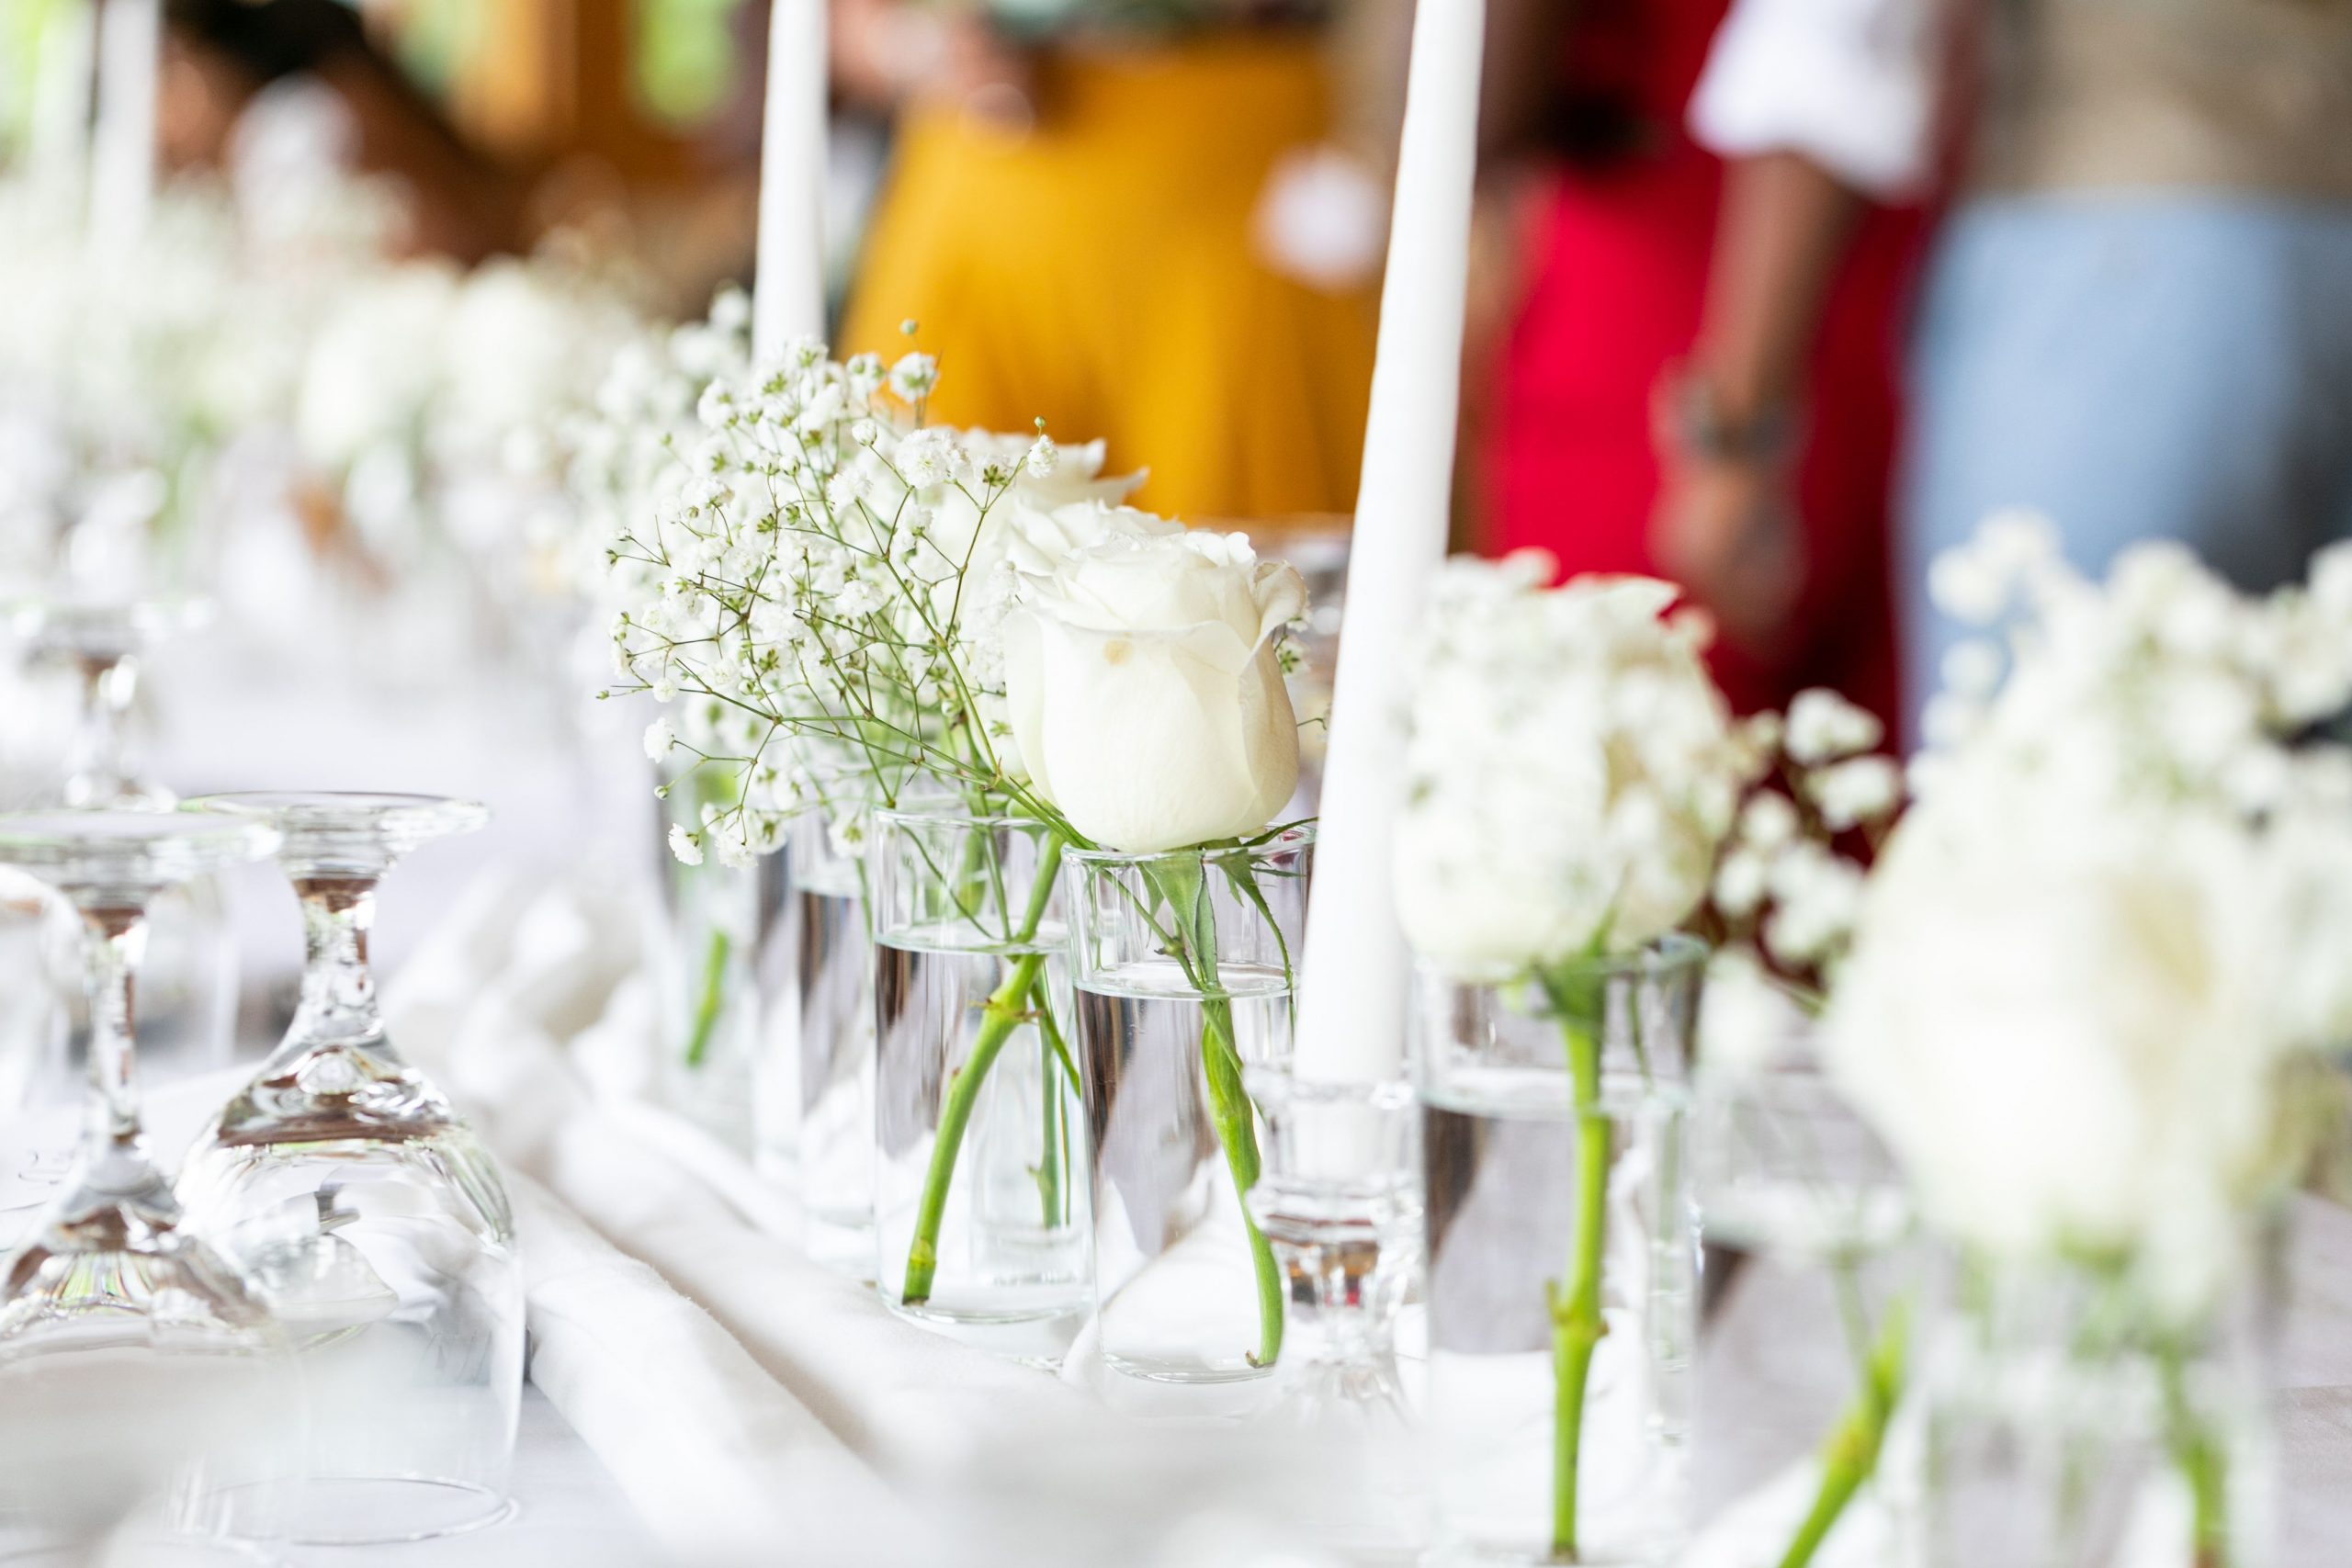 Wedding flowers on table with white tablecloth